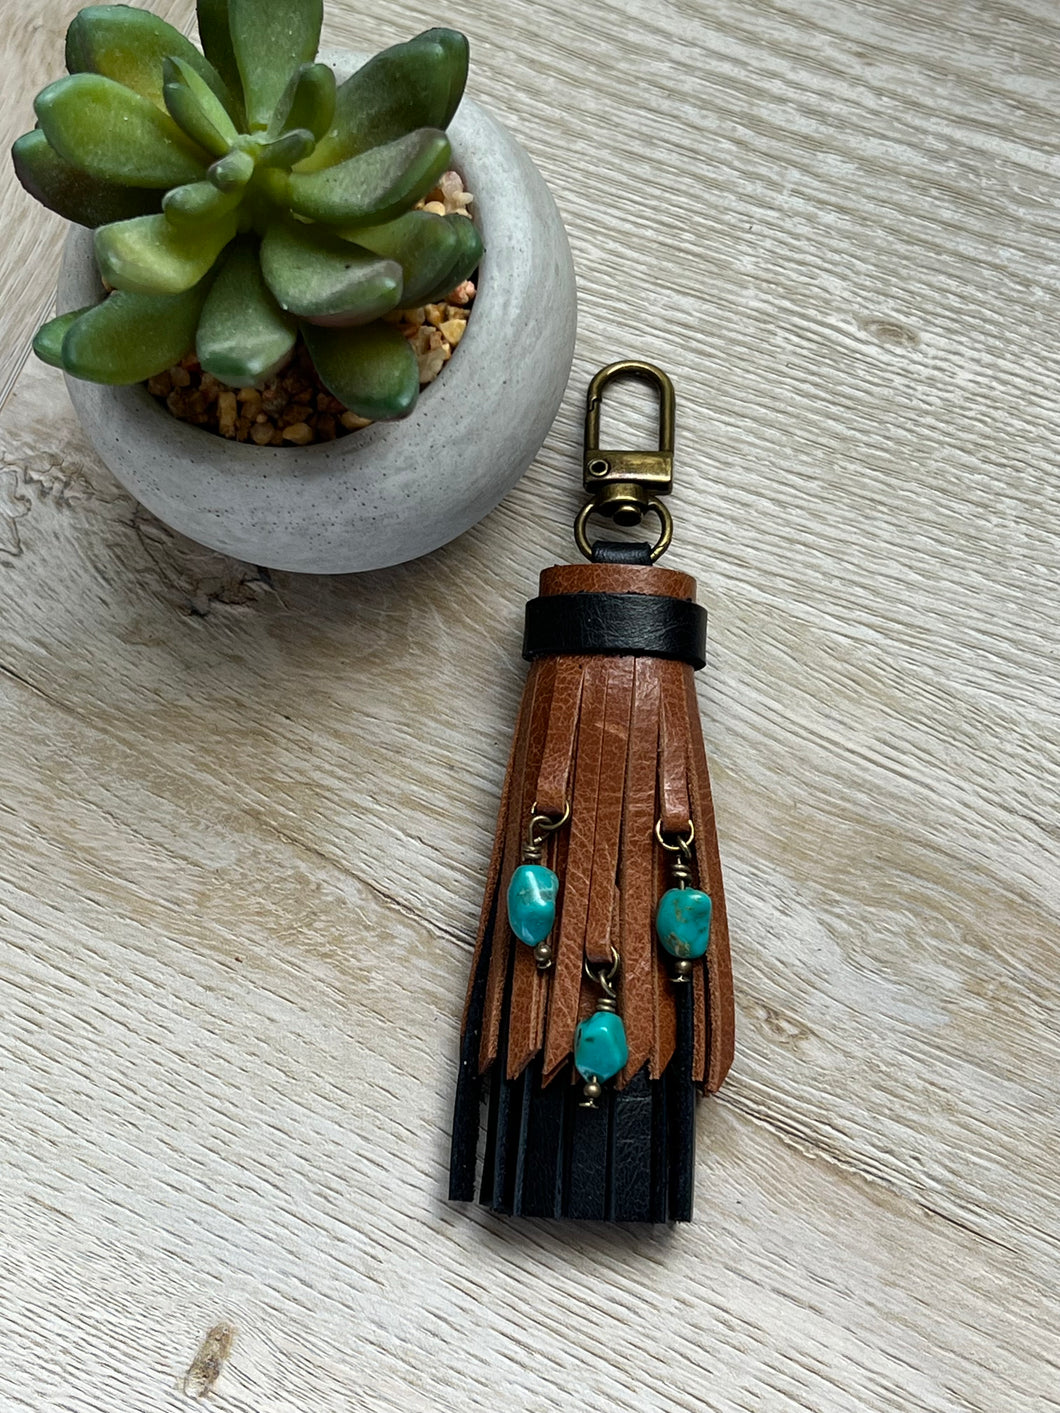 Mini Clip Tassel- Black and Cafe Leather with Turquoise Stone Charms